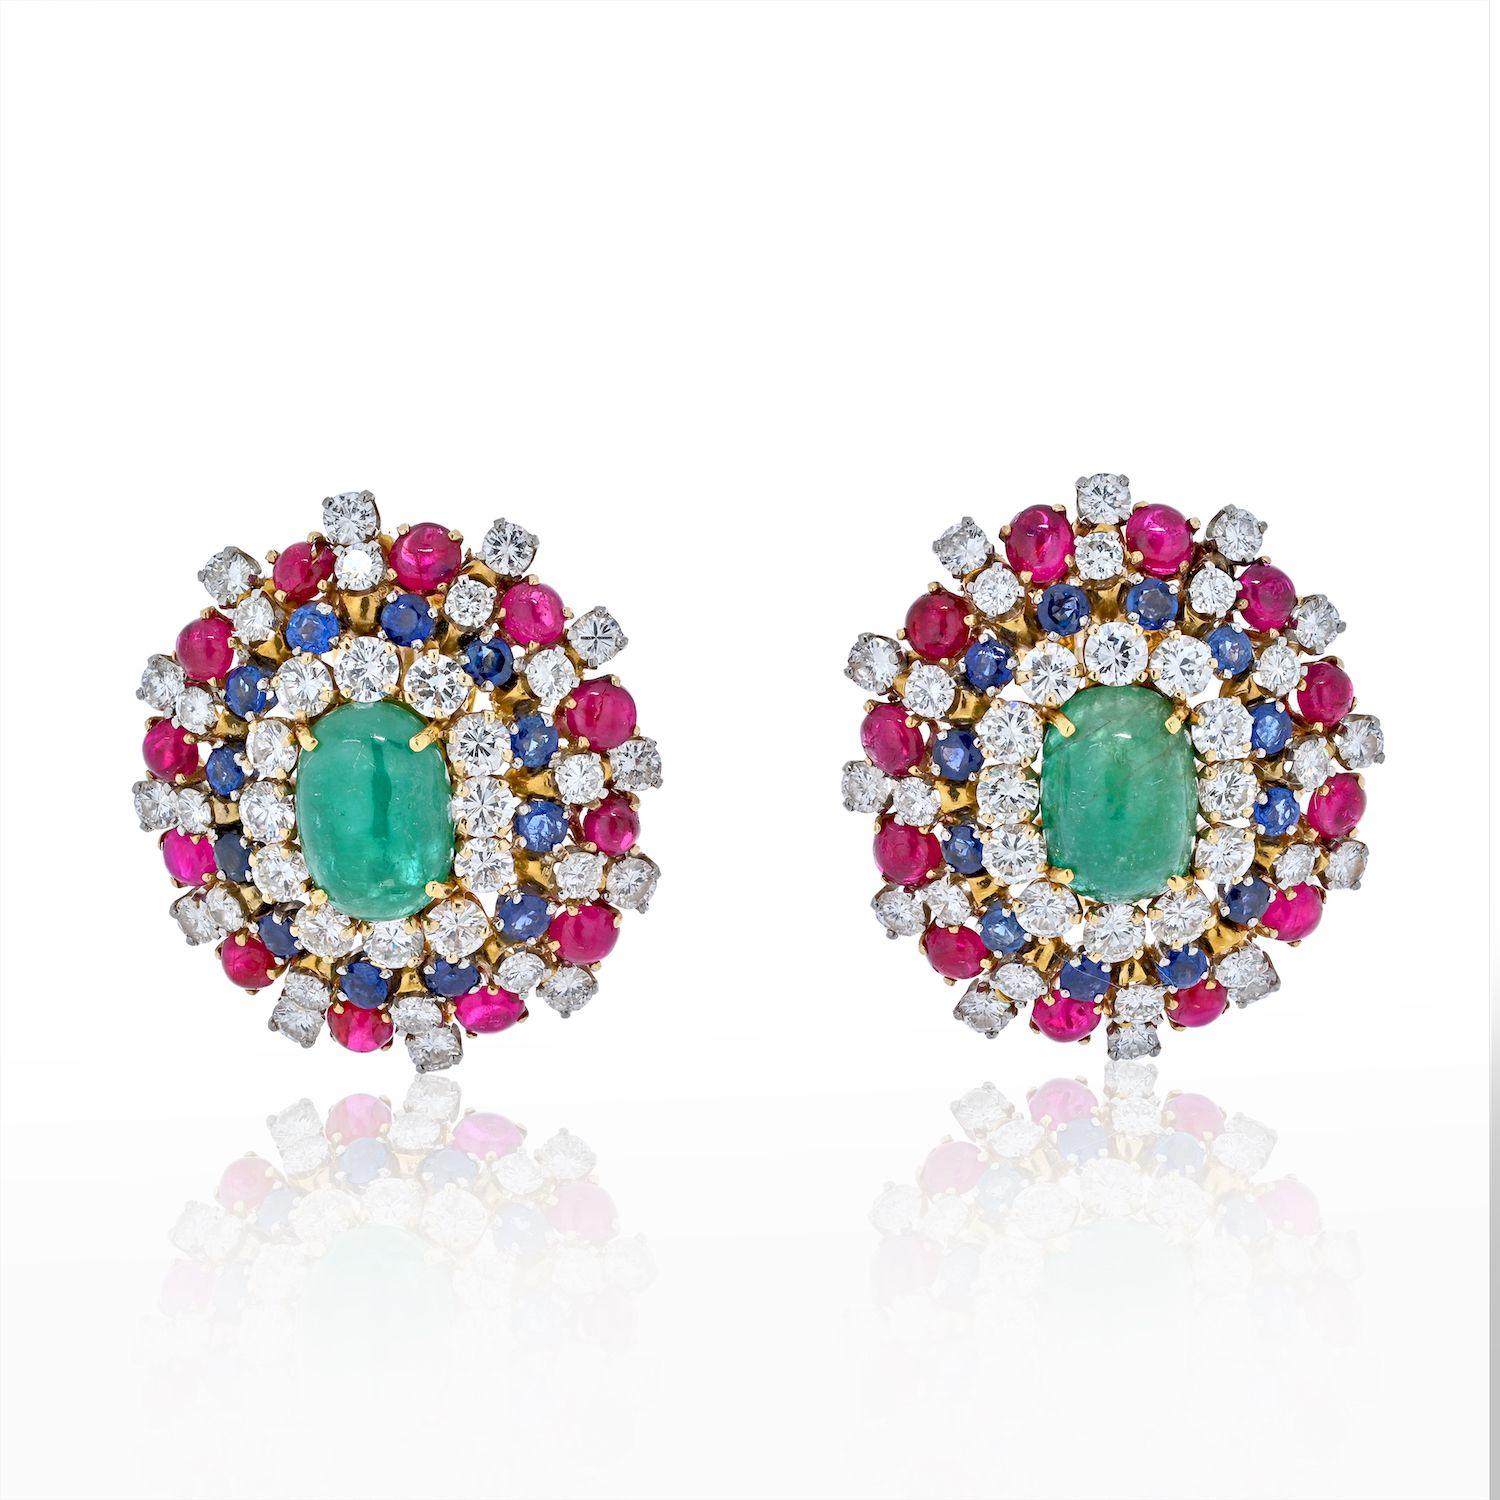 Designed by David Webb these cluster earrings come to us from 1970s. This is a multicolored gemstone domed pair of earrings, each centering acabochon-cut natural emerald surrounded by a smaller tier of round-cut diamonds, sapphires and rubies.